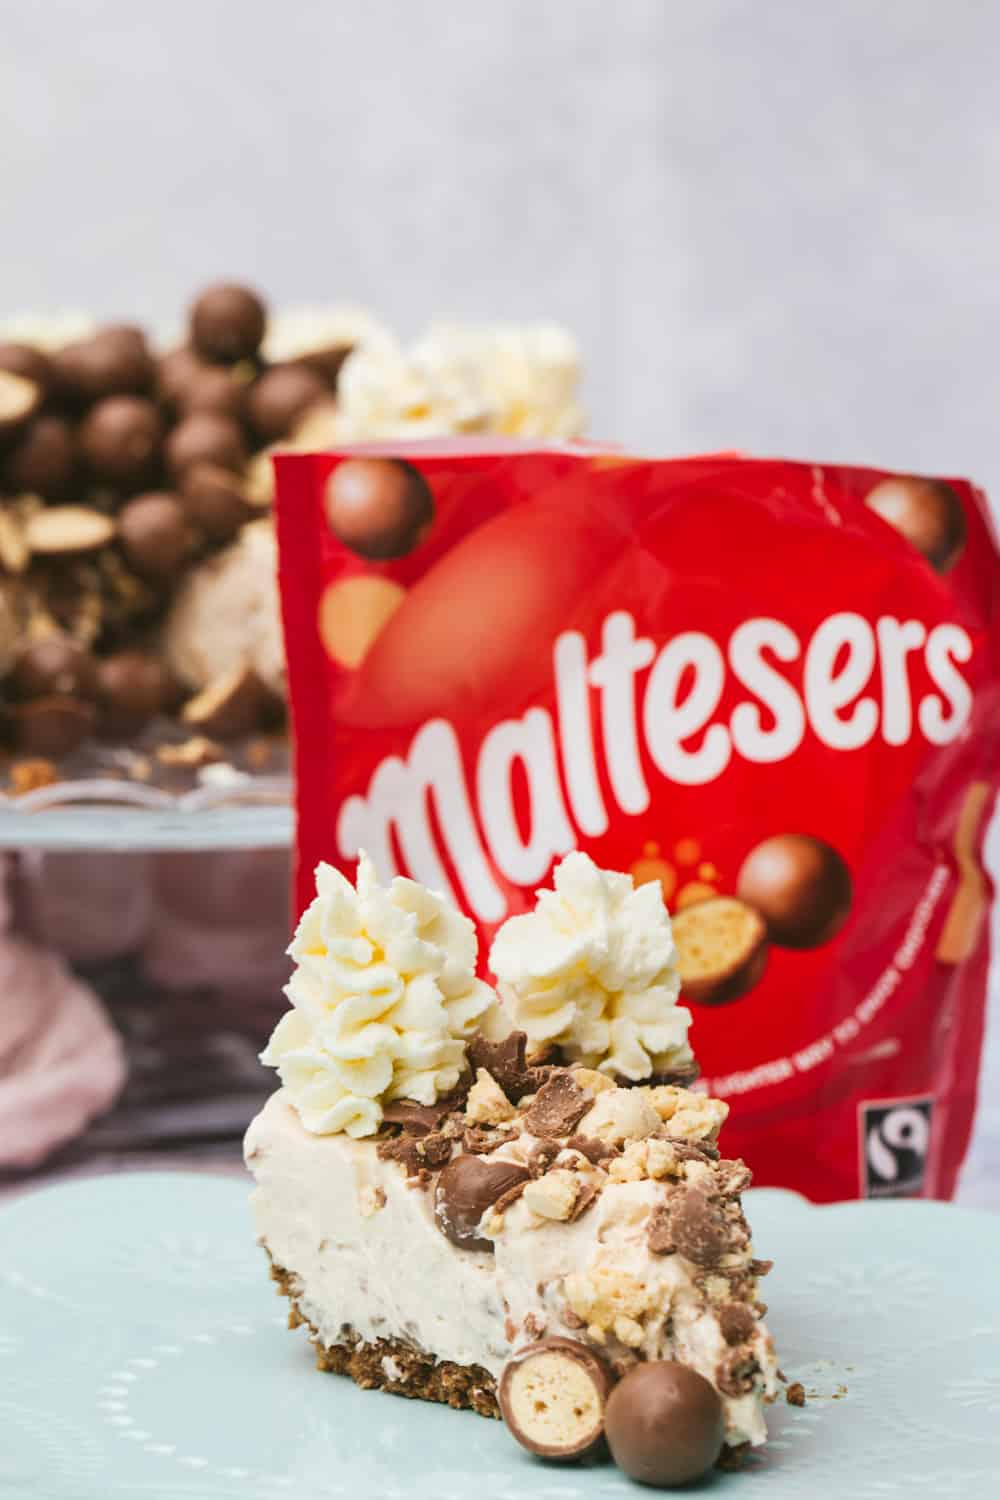 A slice of Malteser cheesecake in the foreground and a bag of red Maltesers in the background